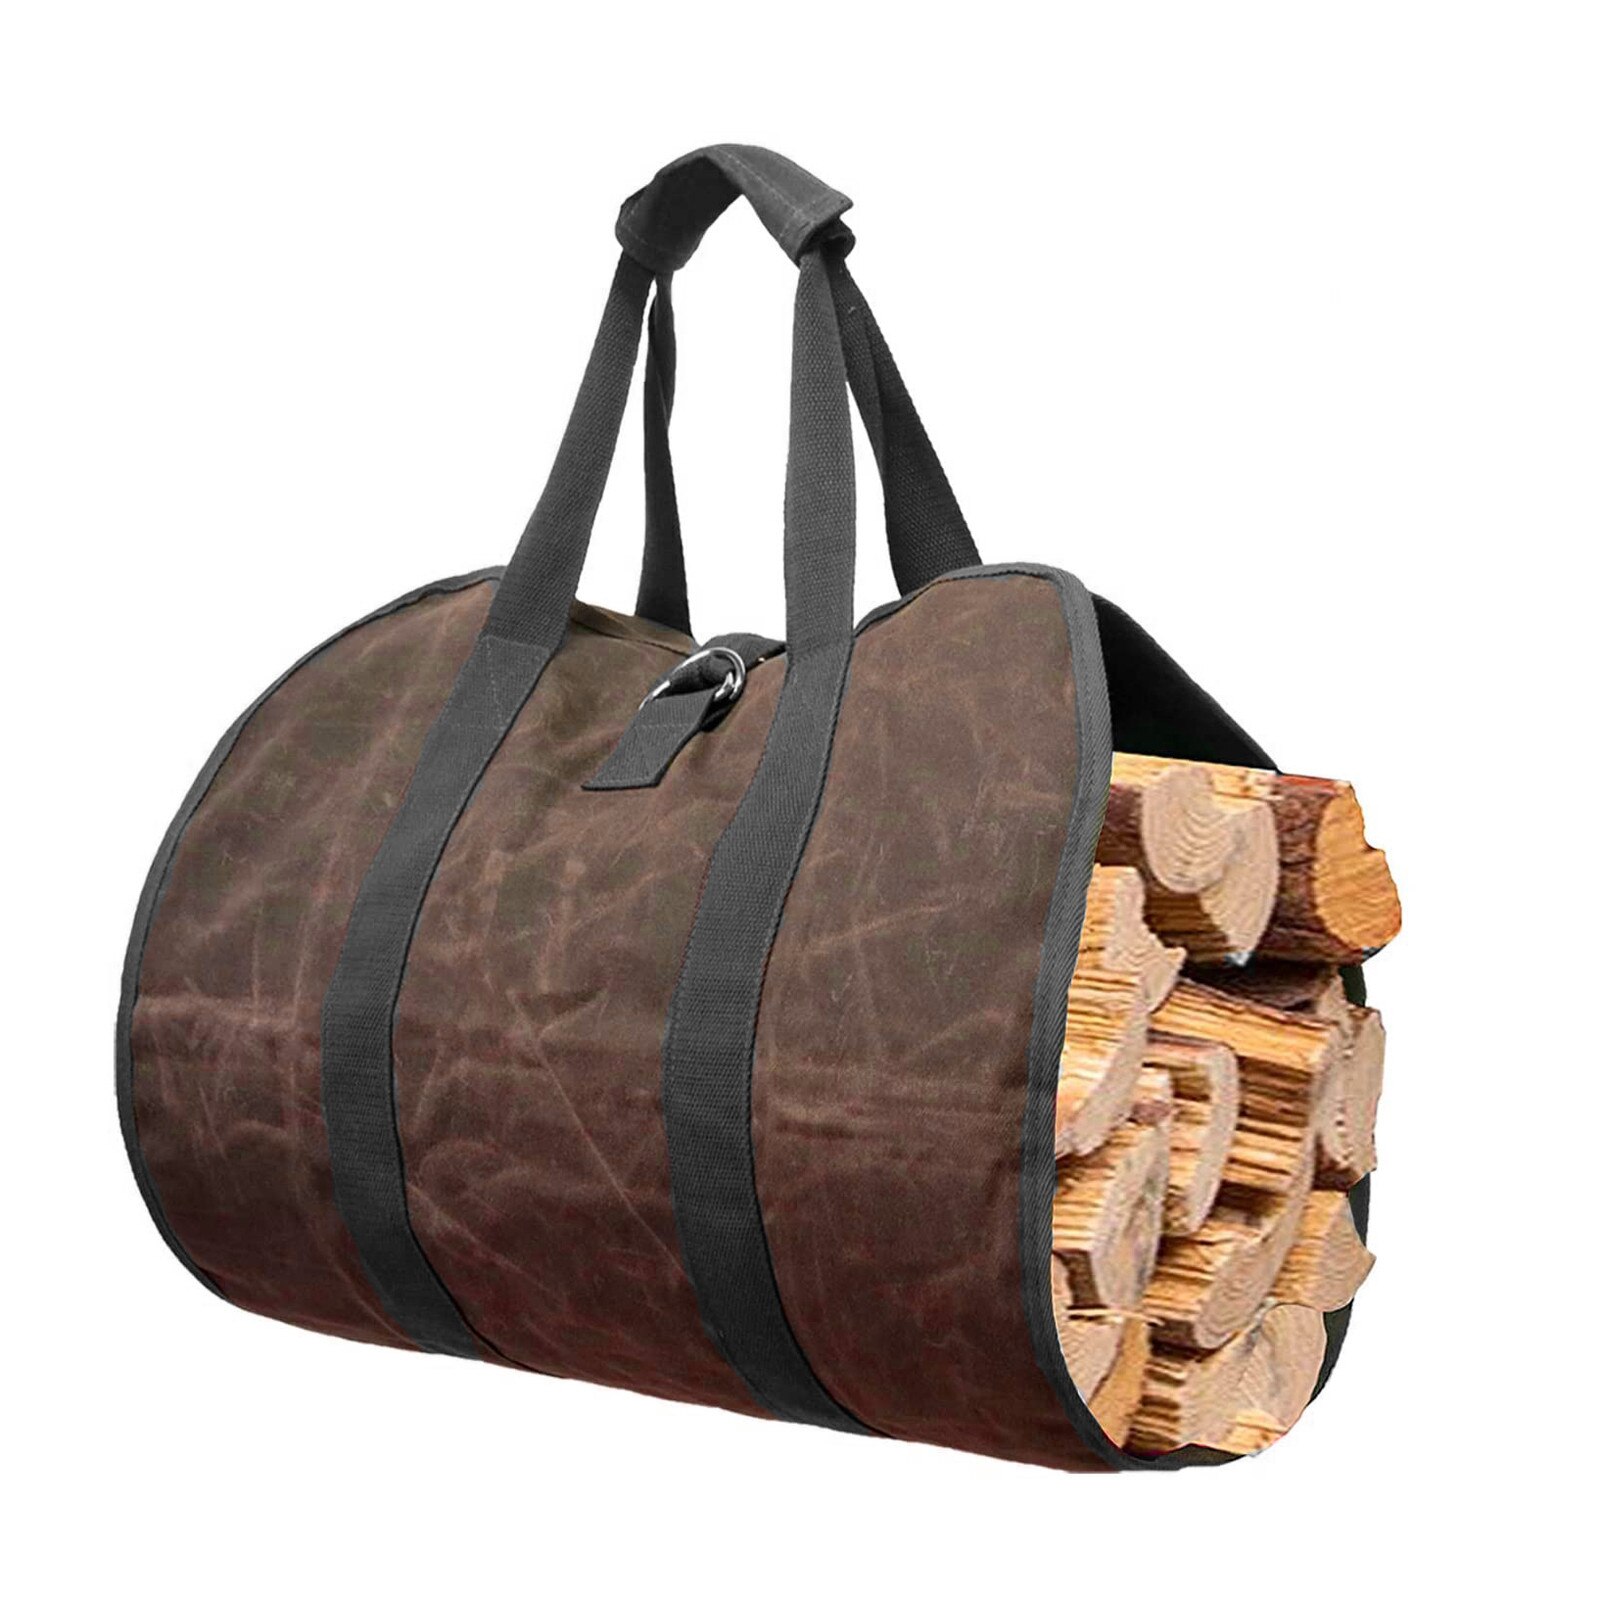 40# Canvas Waxed Firewood Fireplace Carrying Bag, Outdoor, With Wooden Handles Wood Carrier For Fireplace Waxed Canvas Bag